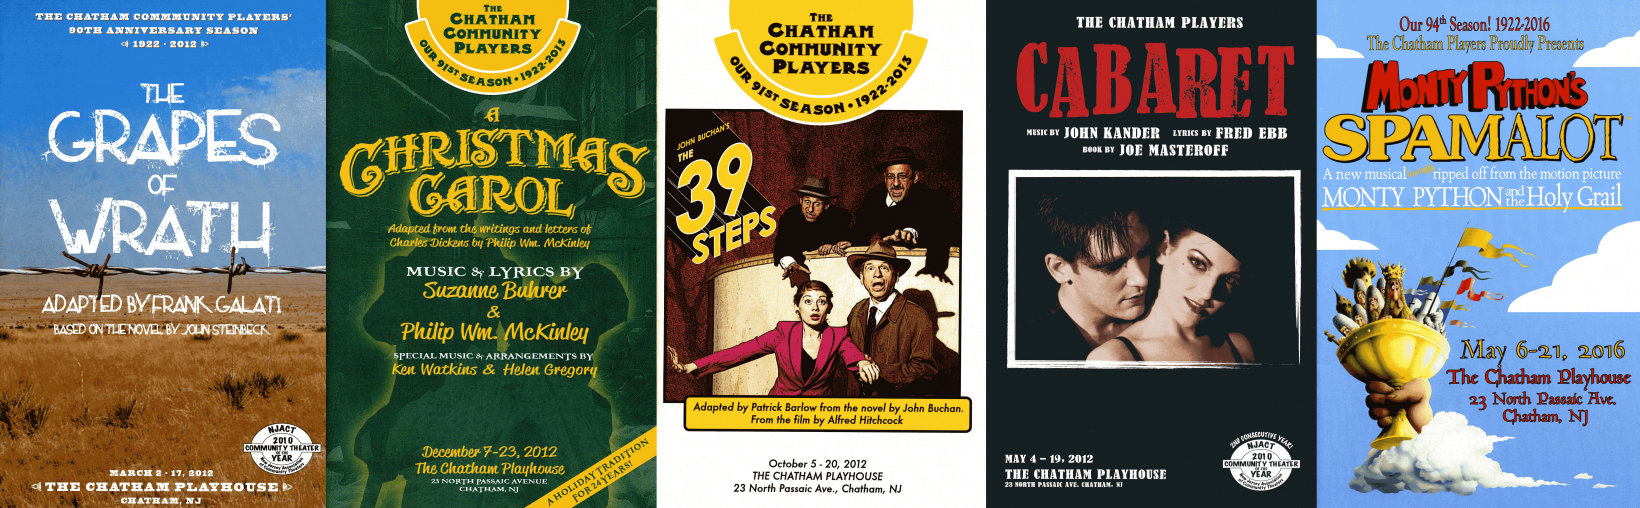 Chatham Players Past Productions